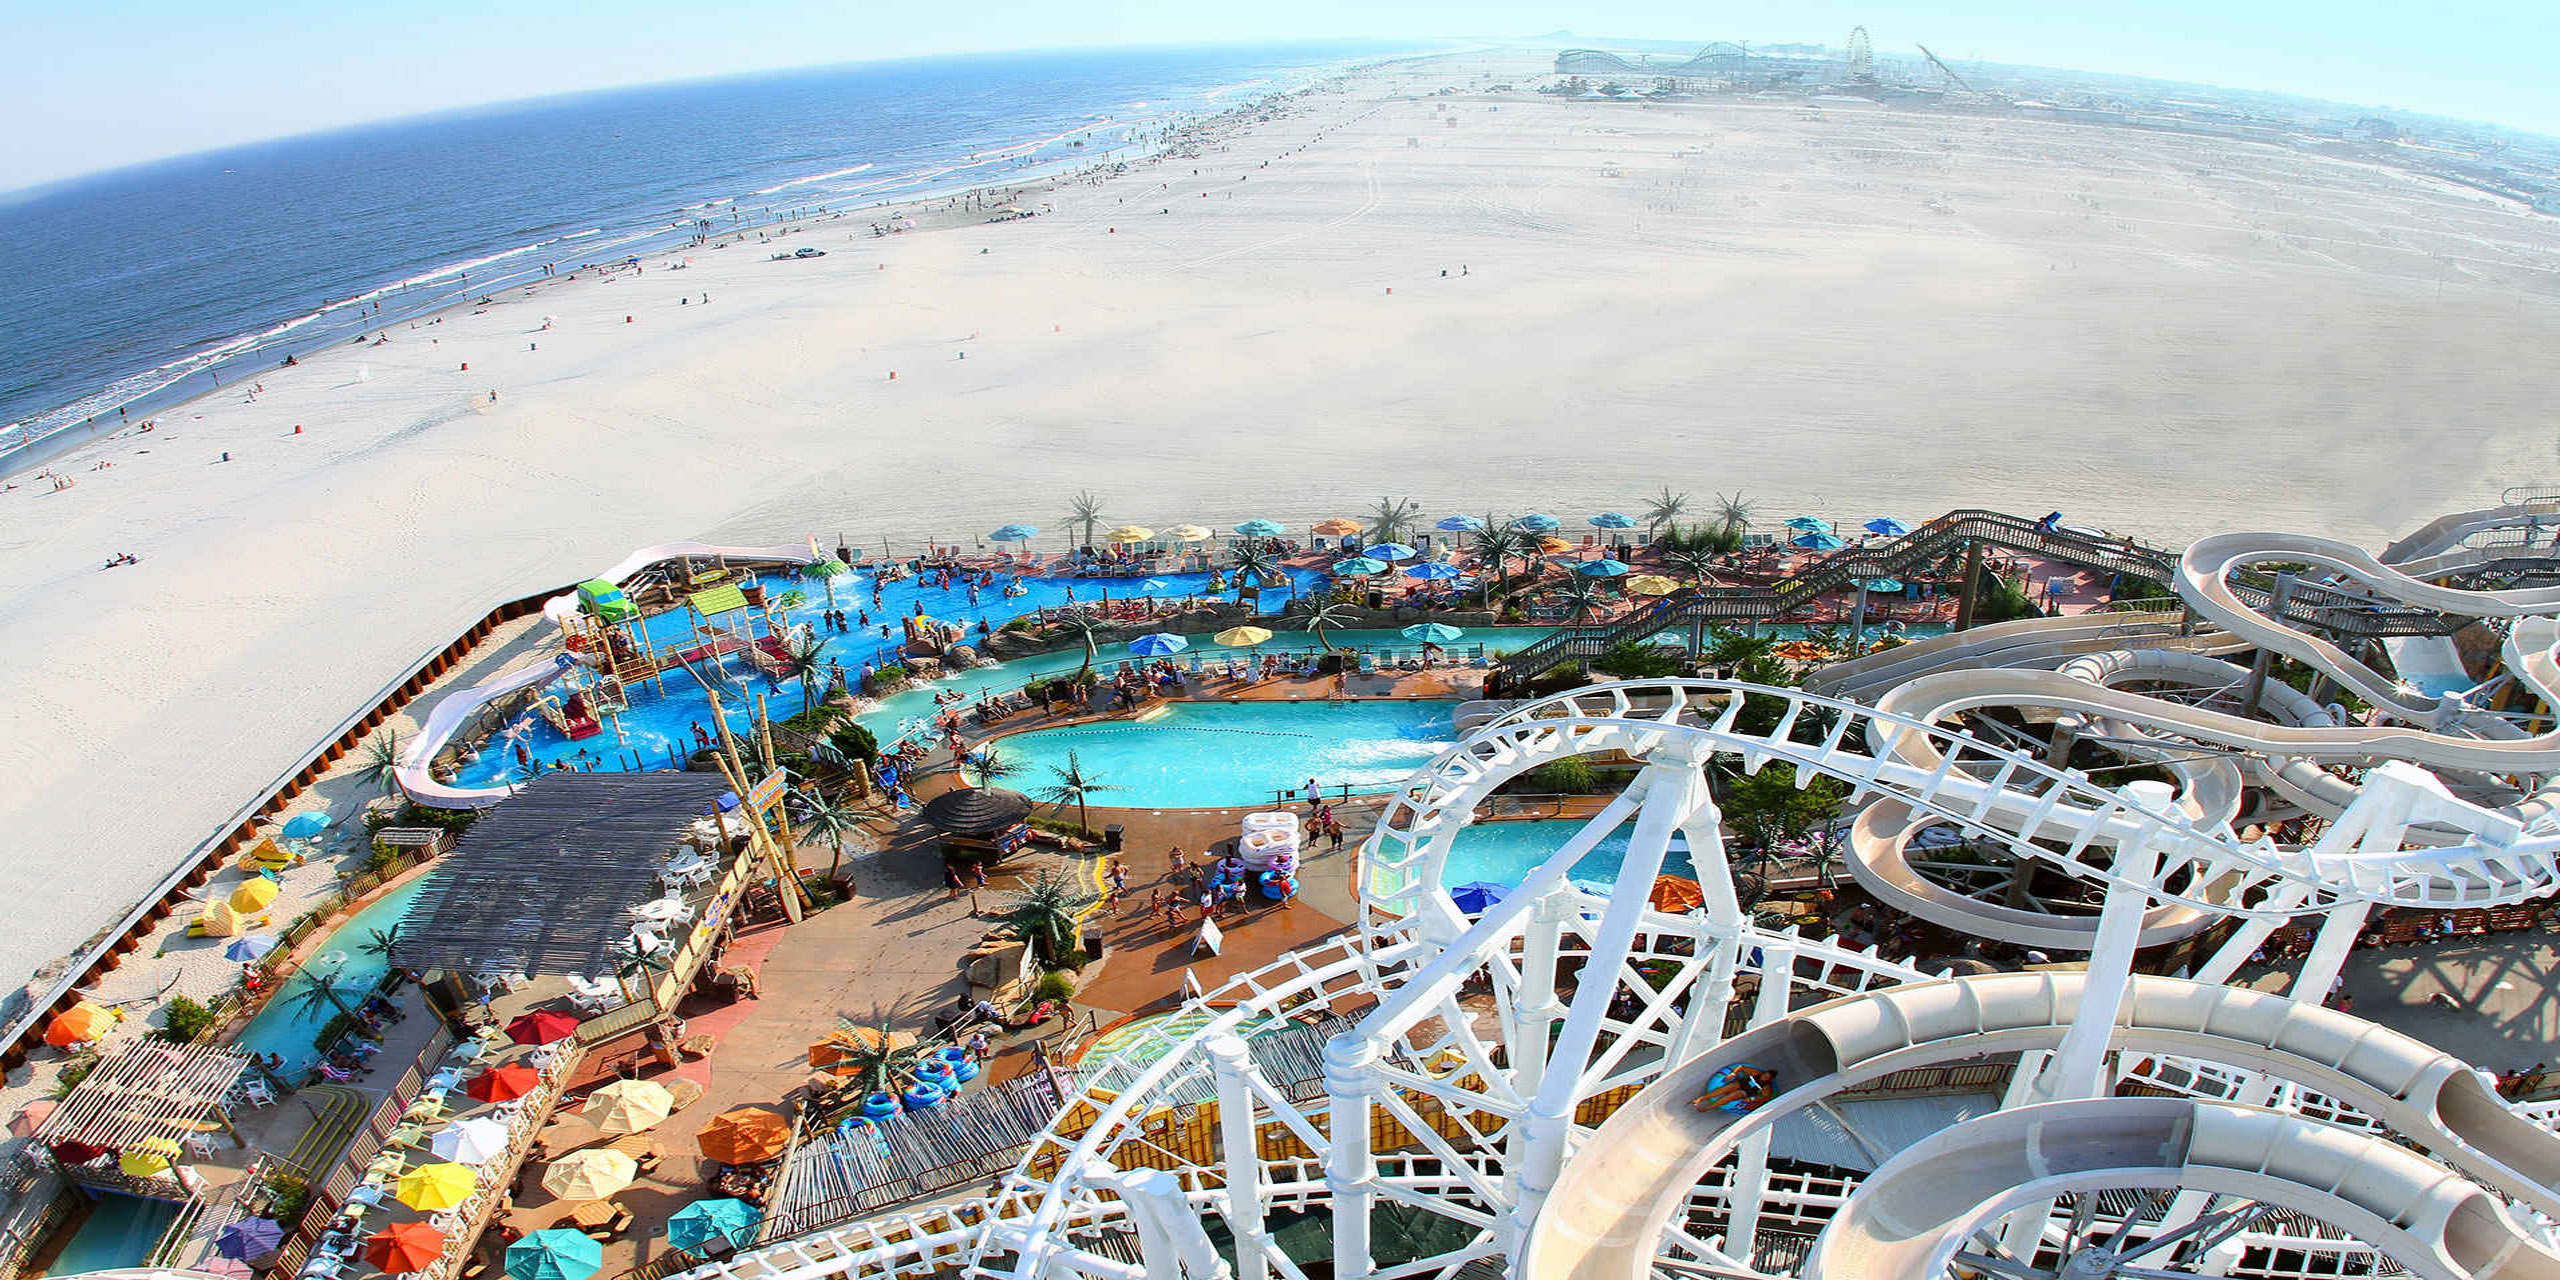 10 Best Beach Water Parks for Families | Family Vacation Critic